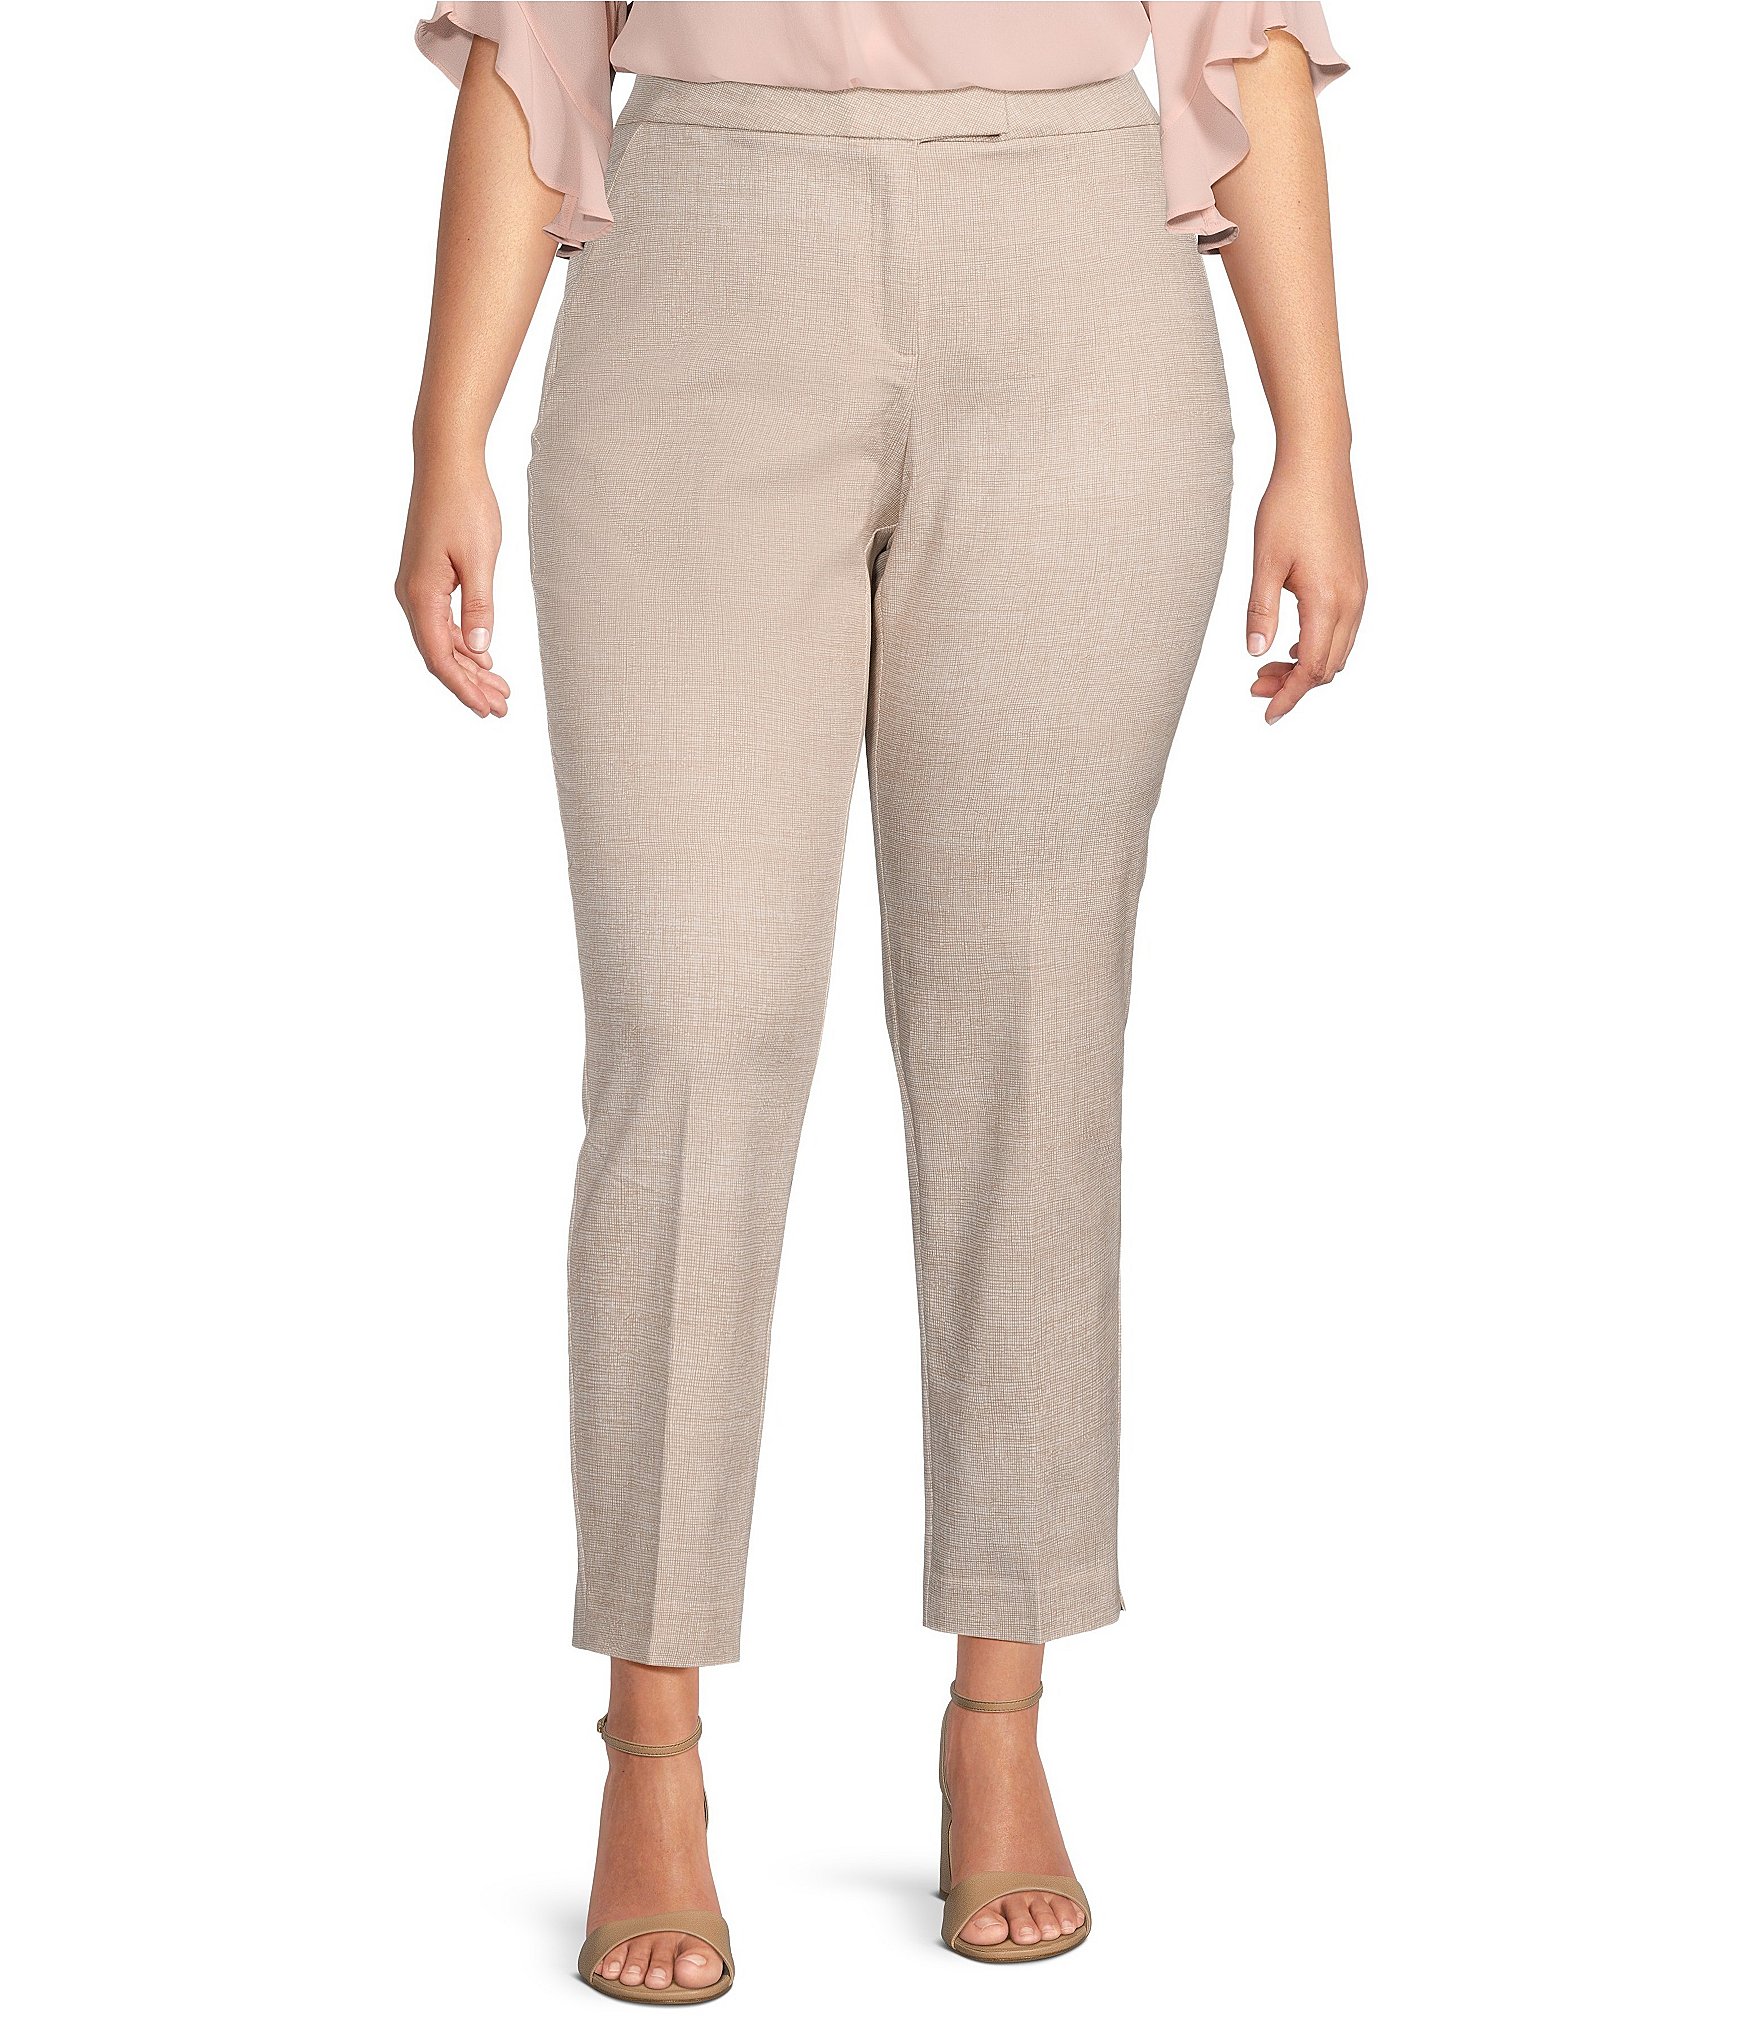 https://dimg.dillards.com/is/image/DillardsZoom/zoom/investments-plus-size-the-5th-ave-fit-elite-stretch-ankle-straight-pants/00000000_zi_6a2ba66c-6db8-472b-9565-a8d7f4250d3f.jpg